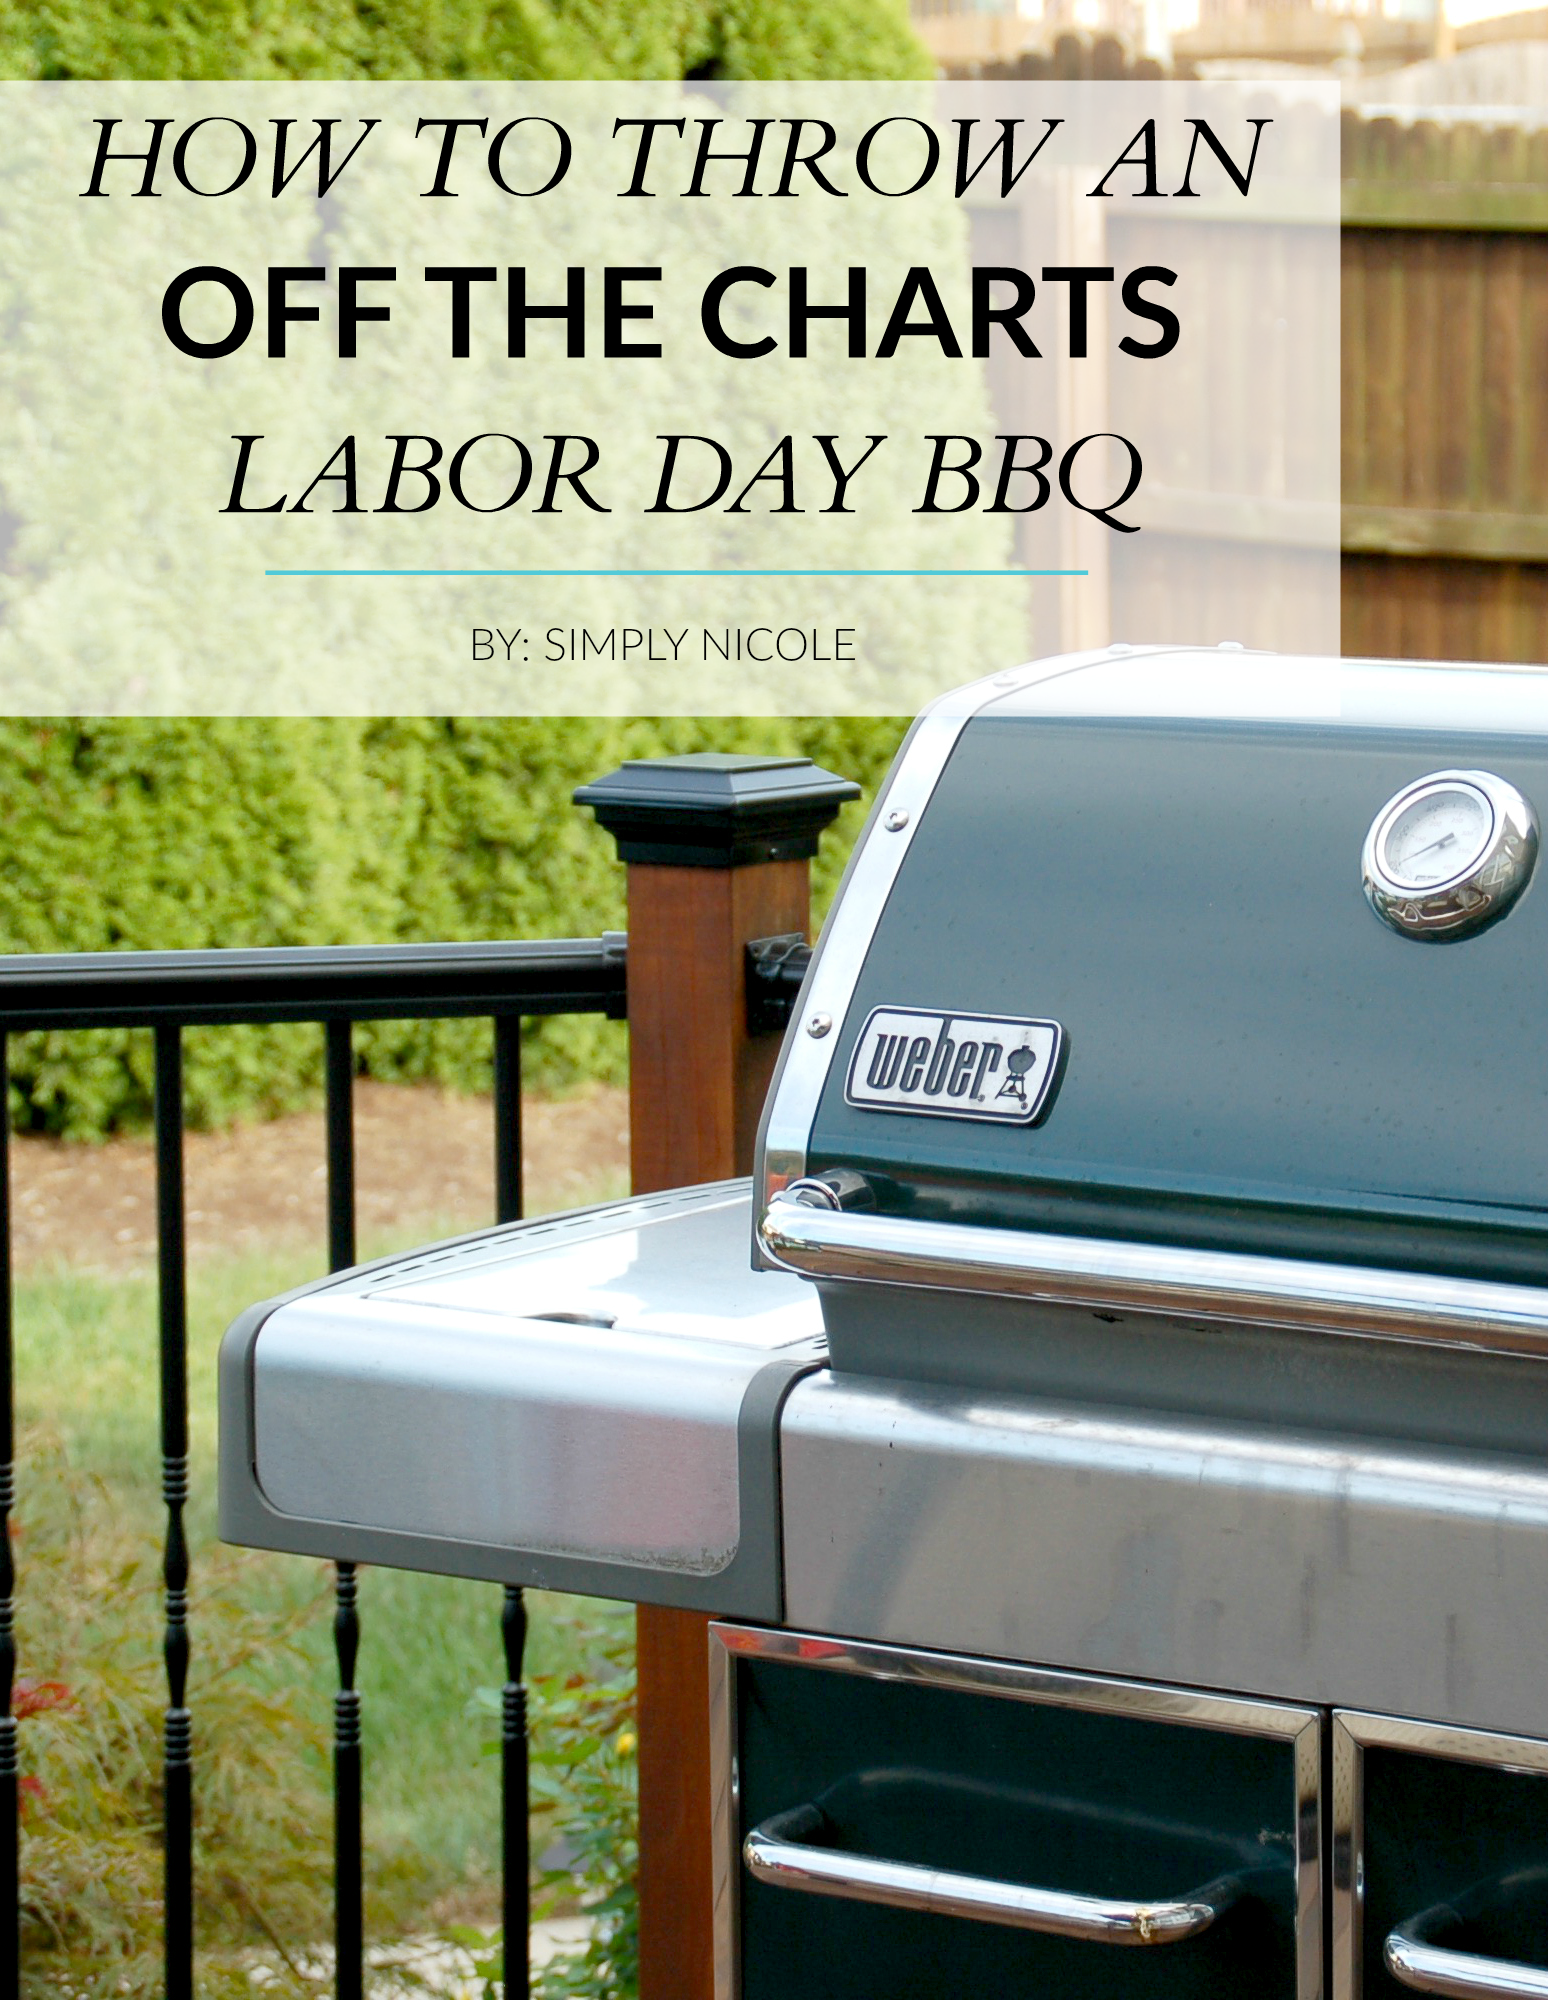 labor day bbq tips